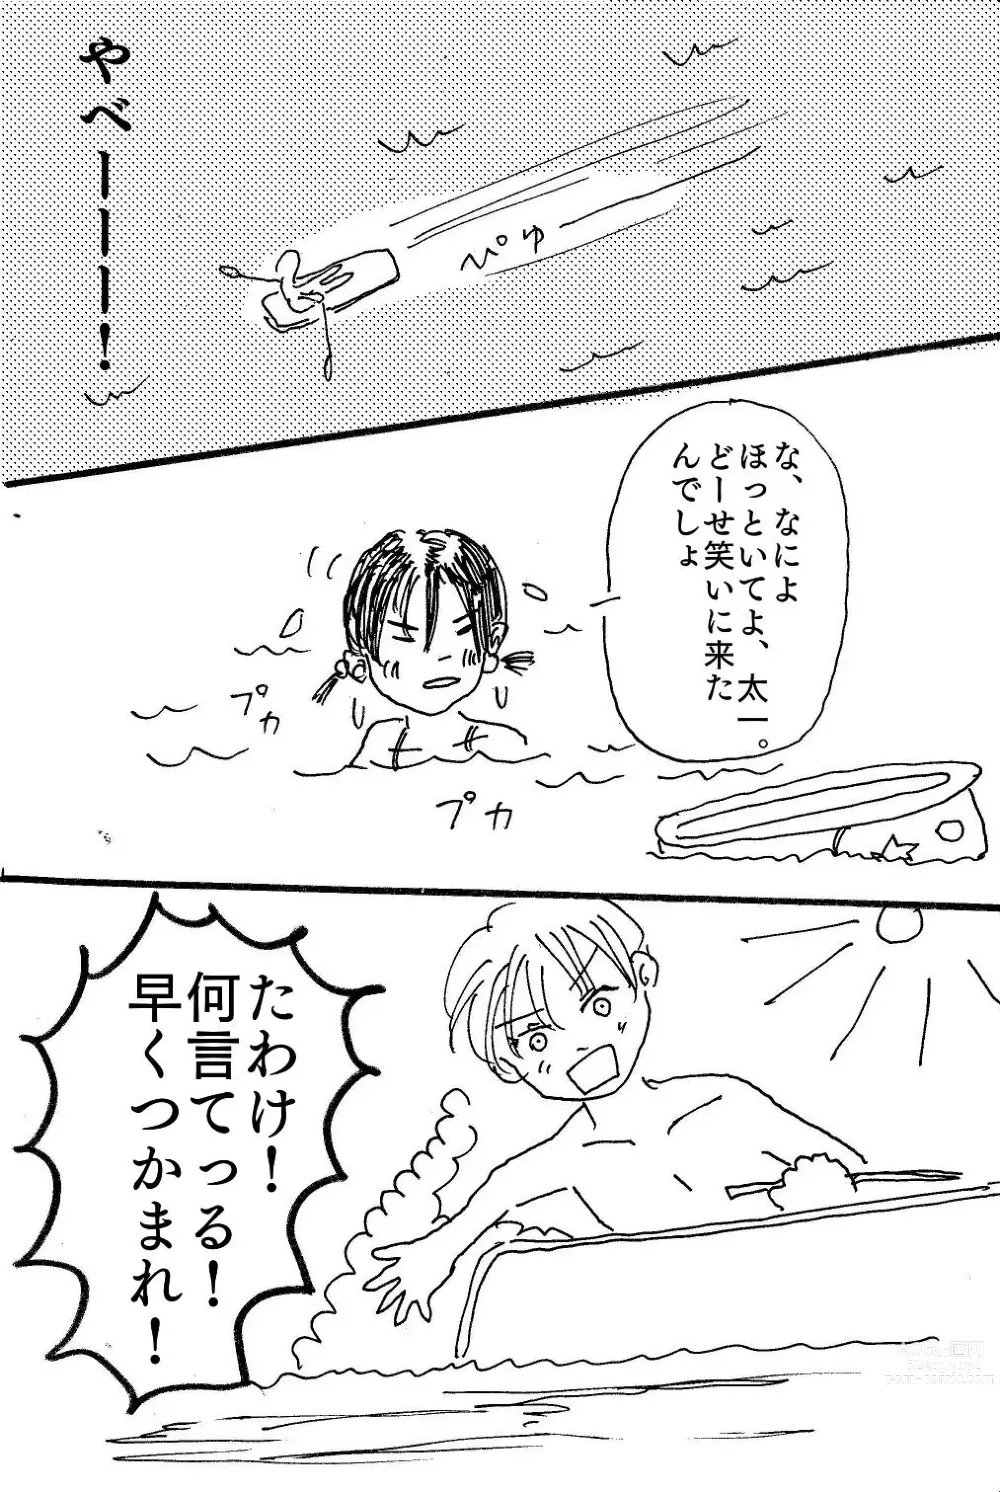 Page 7 of doujinshi 映子と太一